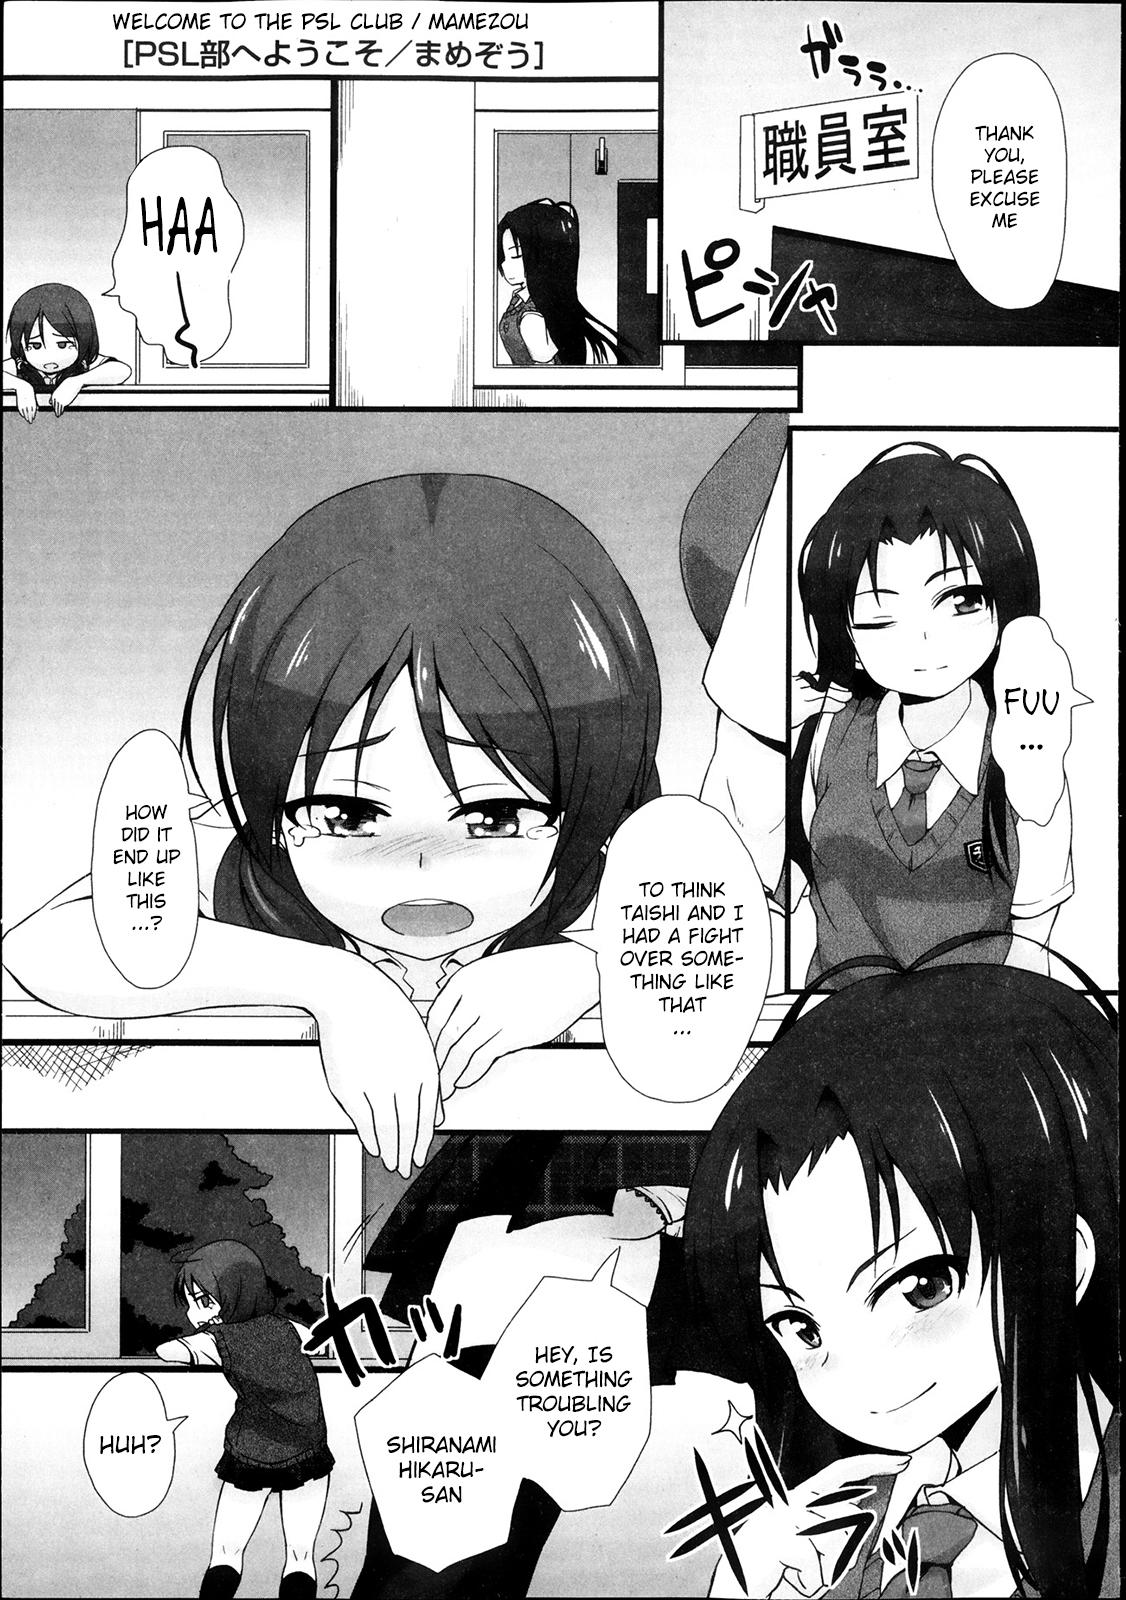 Blowjob PSL-bu e Youkoso | Welcome to the PSL Club First Time - Page 1